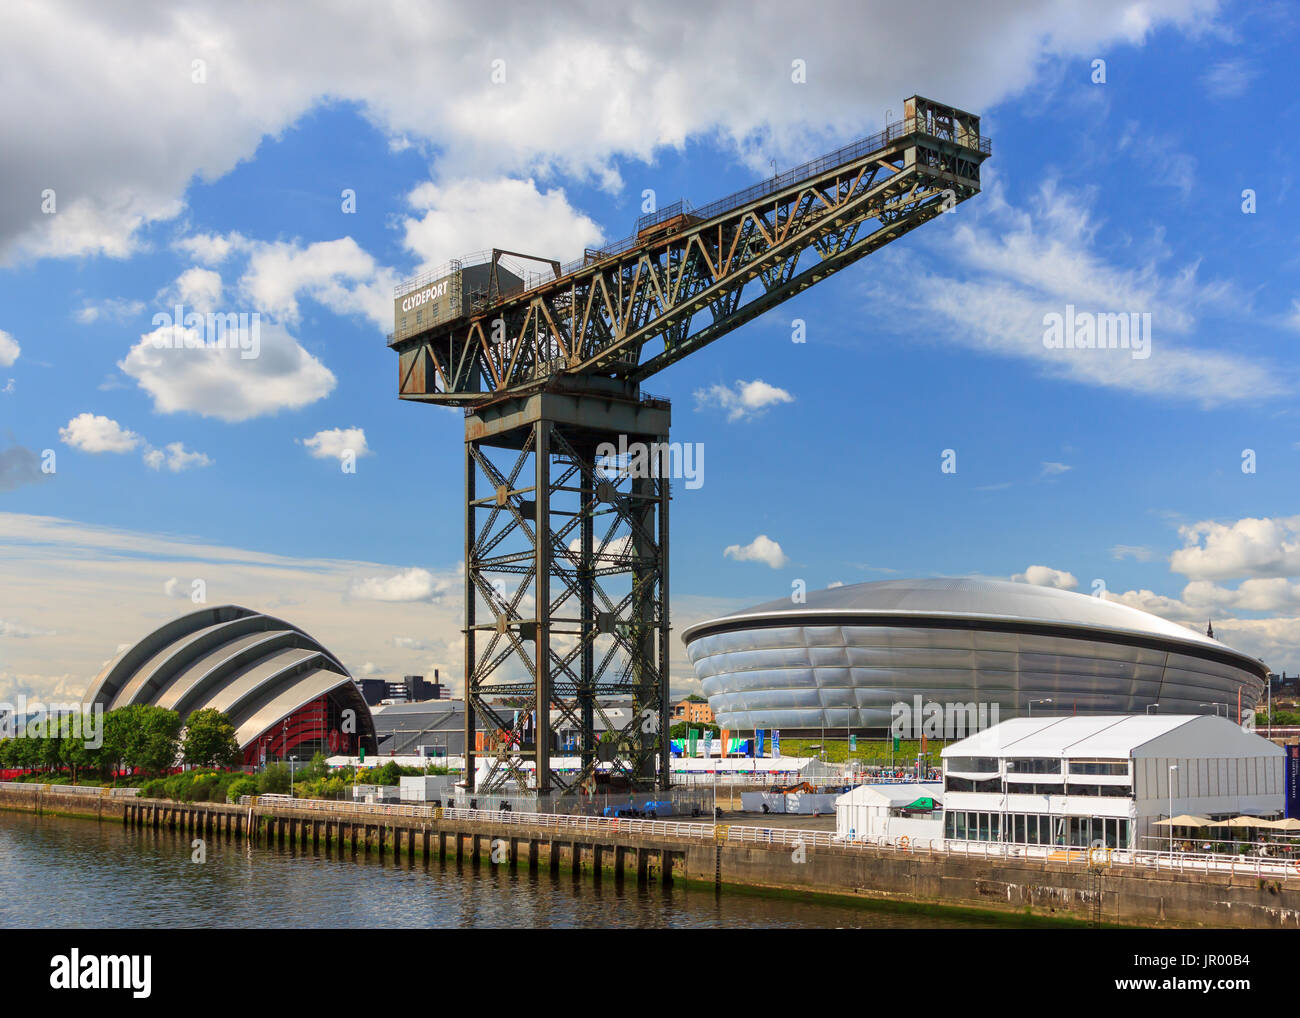 The Finnieston Crane on the banks of the River Clyde in Glasgow, Scotland.  In the background is the SSE Hydro arena and the Clyde auditorium. Stock Photo